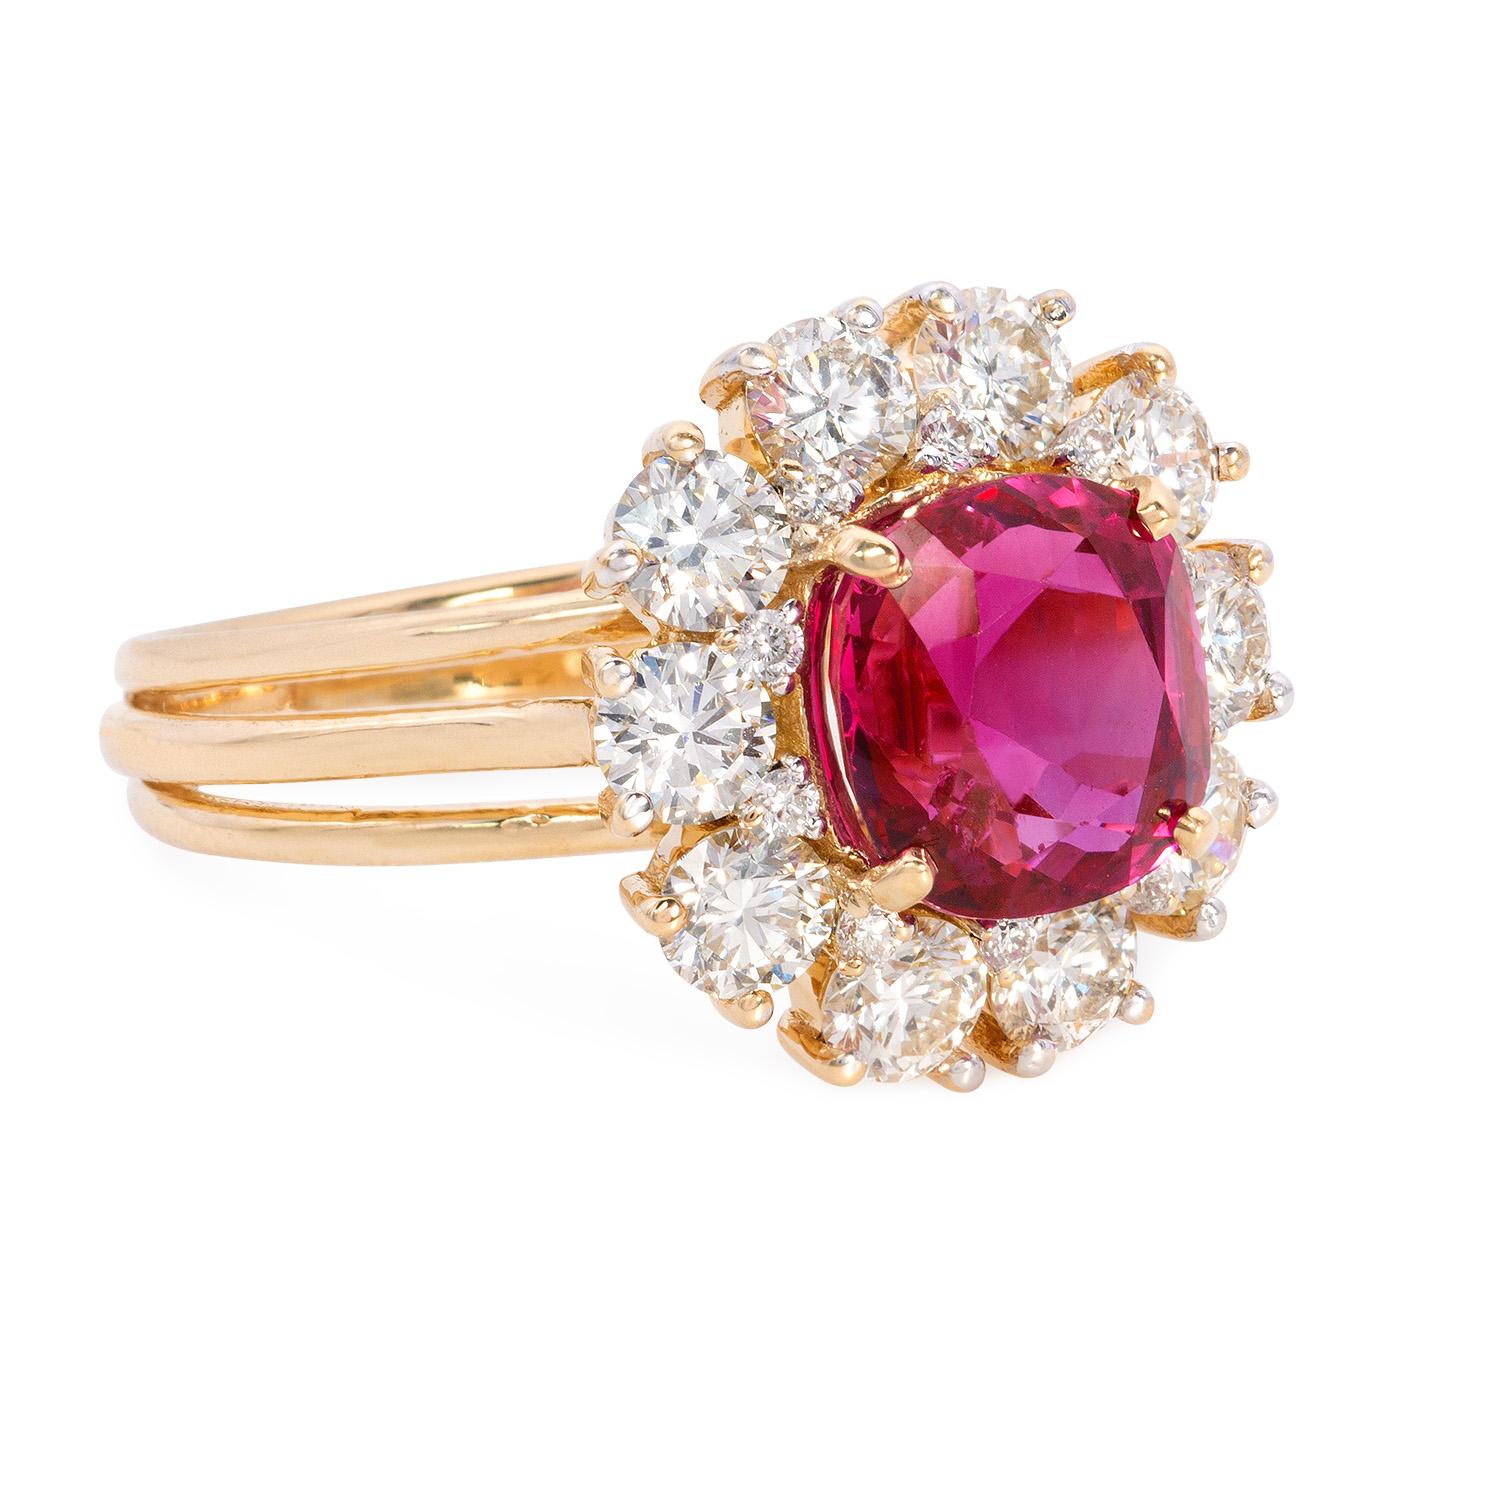 Immerse yourself in the unforgetfull glamour of this truly exceptional ring. 

At its heart lies a magnificent 3.29 Carat Natural Ruby of Burmese origin, a gemstone that embodies passion and vitality with its deep red hue. Embracing this exquisite